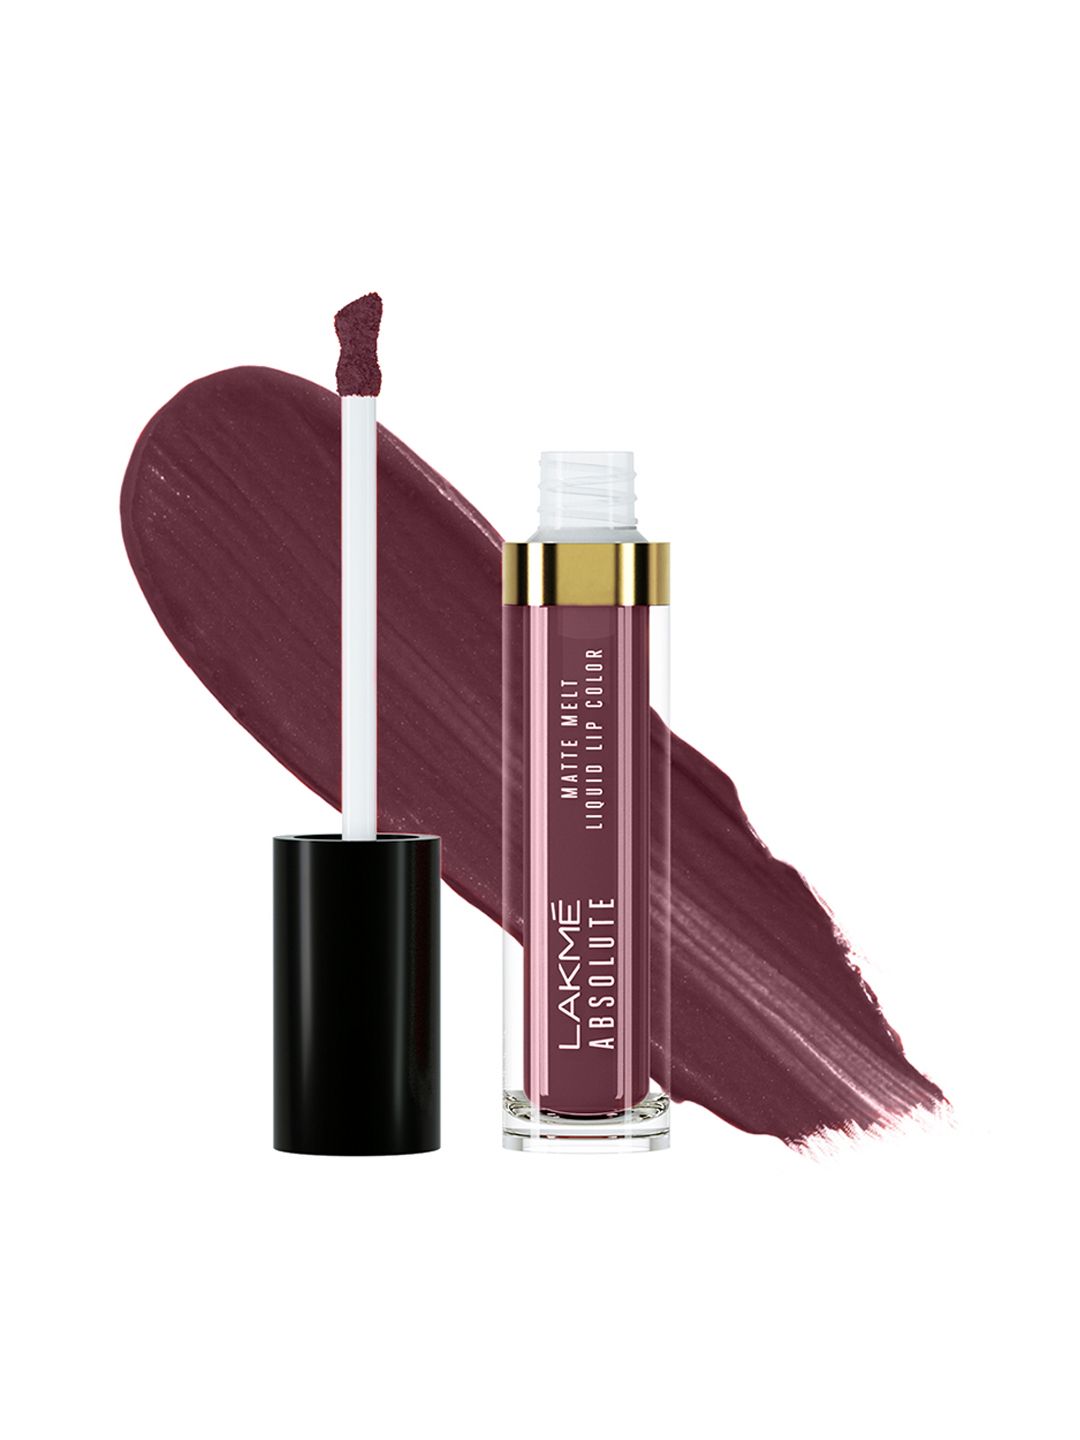 Lakme Absolute Matte Melt Liquid Lip Color - Mulberry Feast 530 Price in India